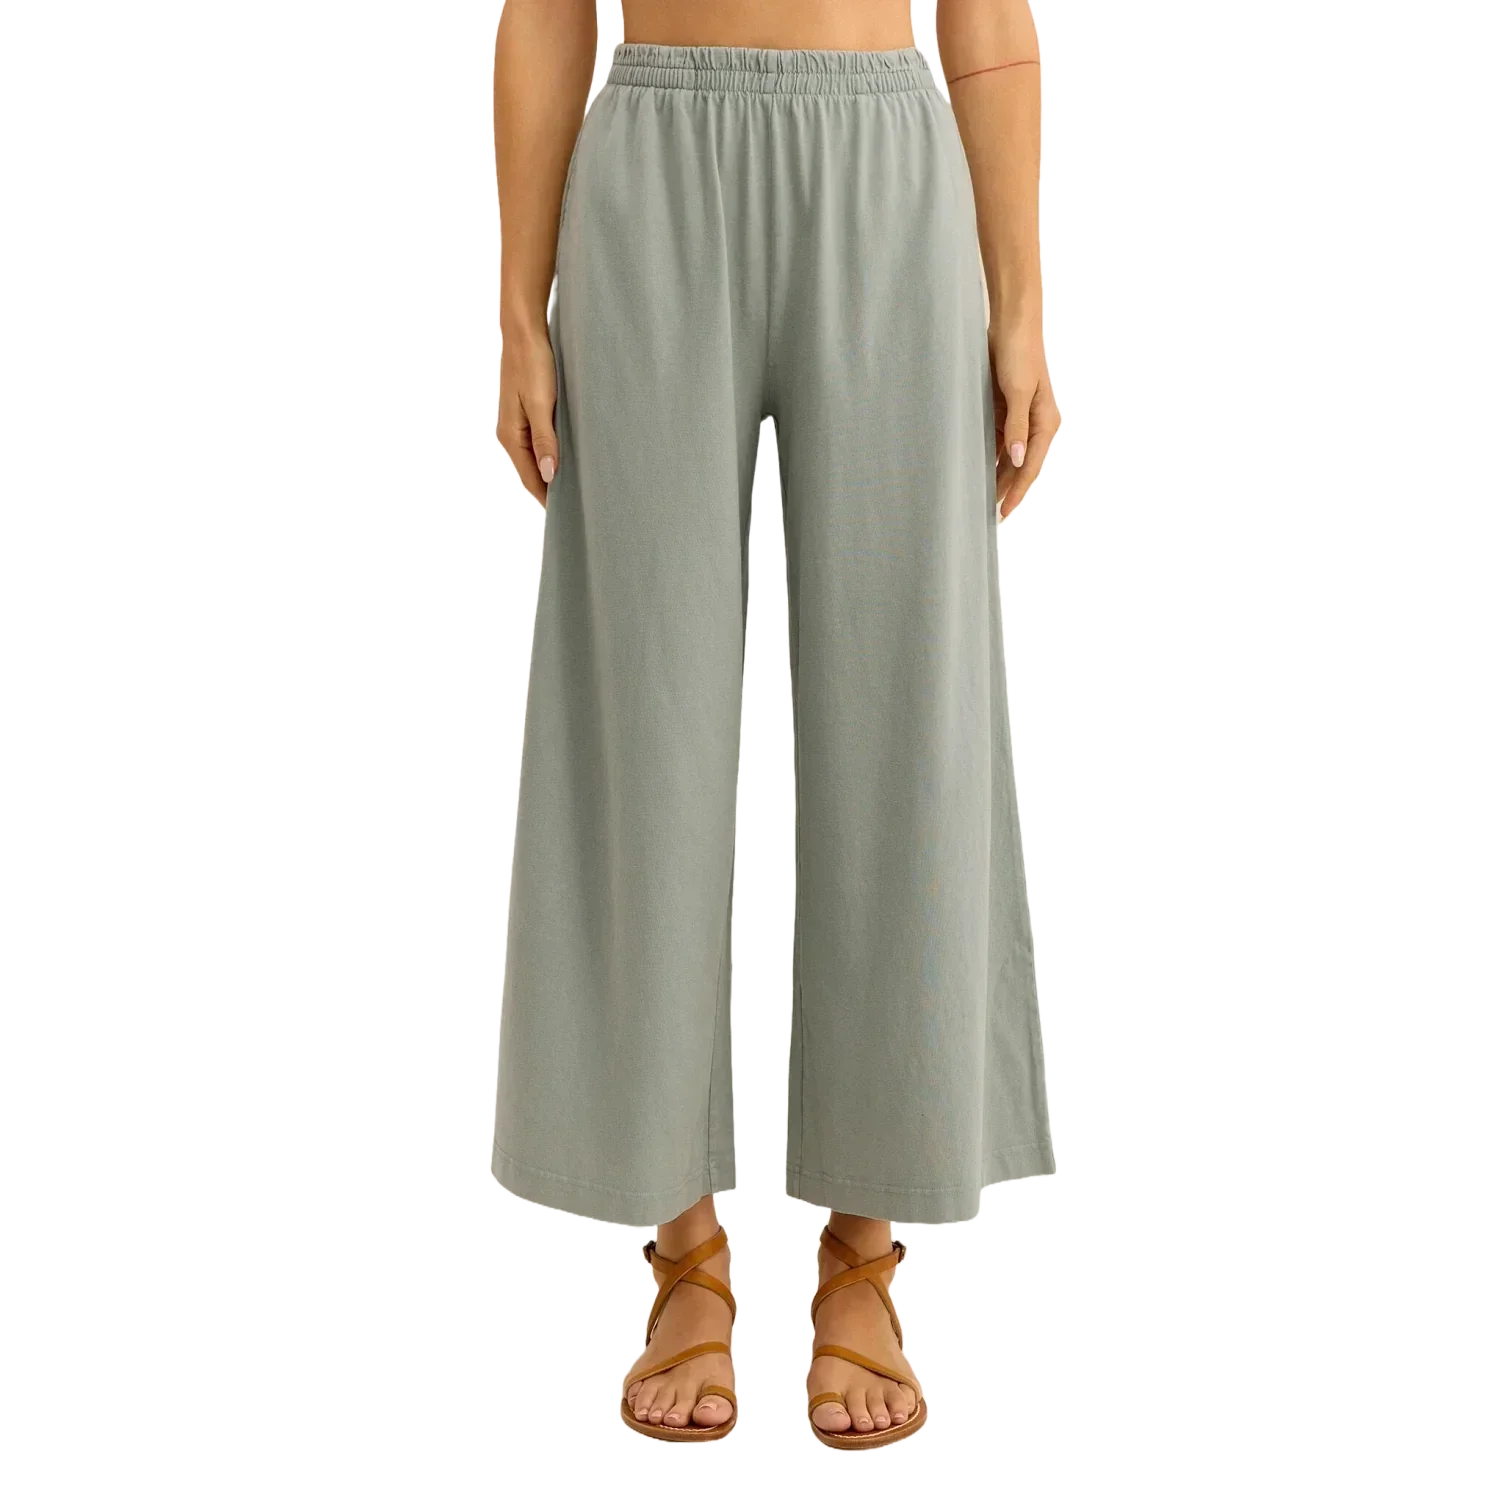 Z Supply 02. WOMENS APPAREL - WOMENS PANTS - WOMENS PANTS CASUAL Women's Scout Jersey Flare Pocket Pant HRG HARBOR GRAY